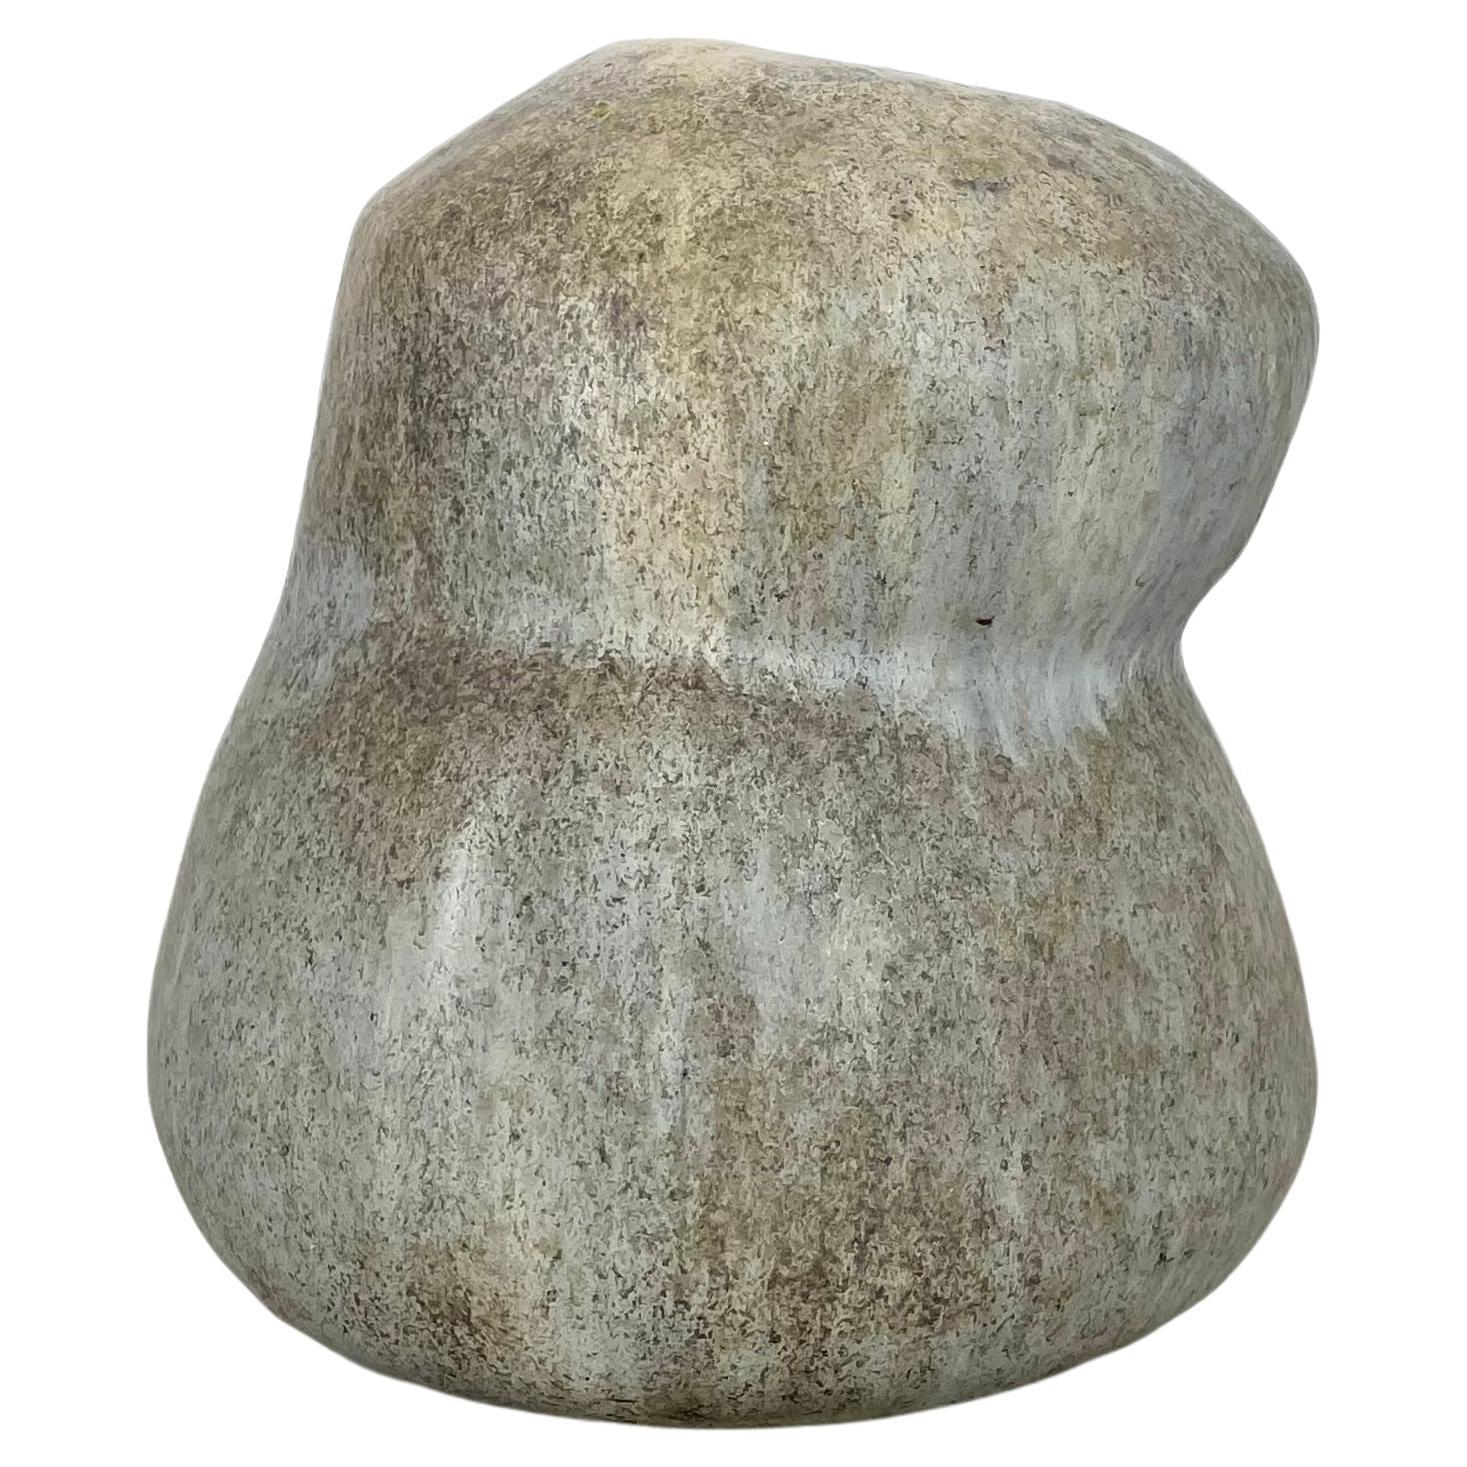 XL Sculptural Studio Pottery Vase Object, Otto Meier, Worpswede, Germany, 1960s